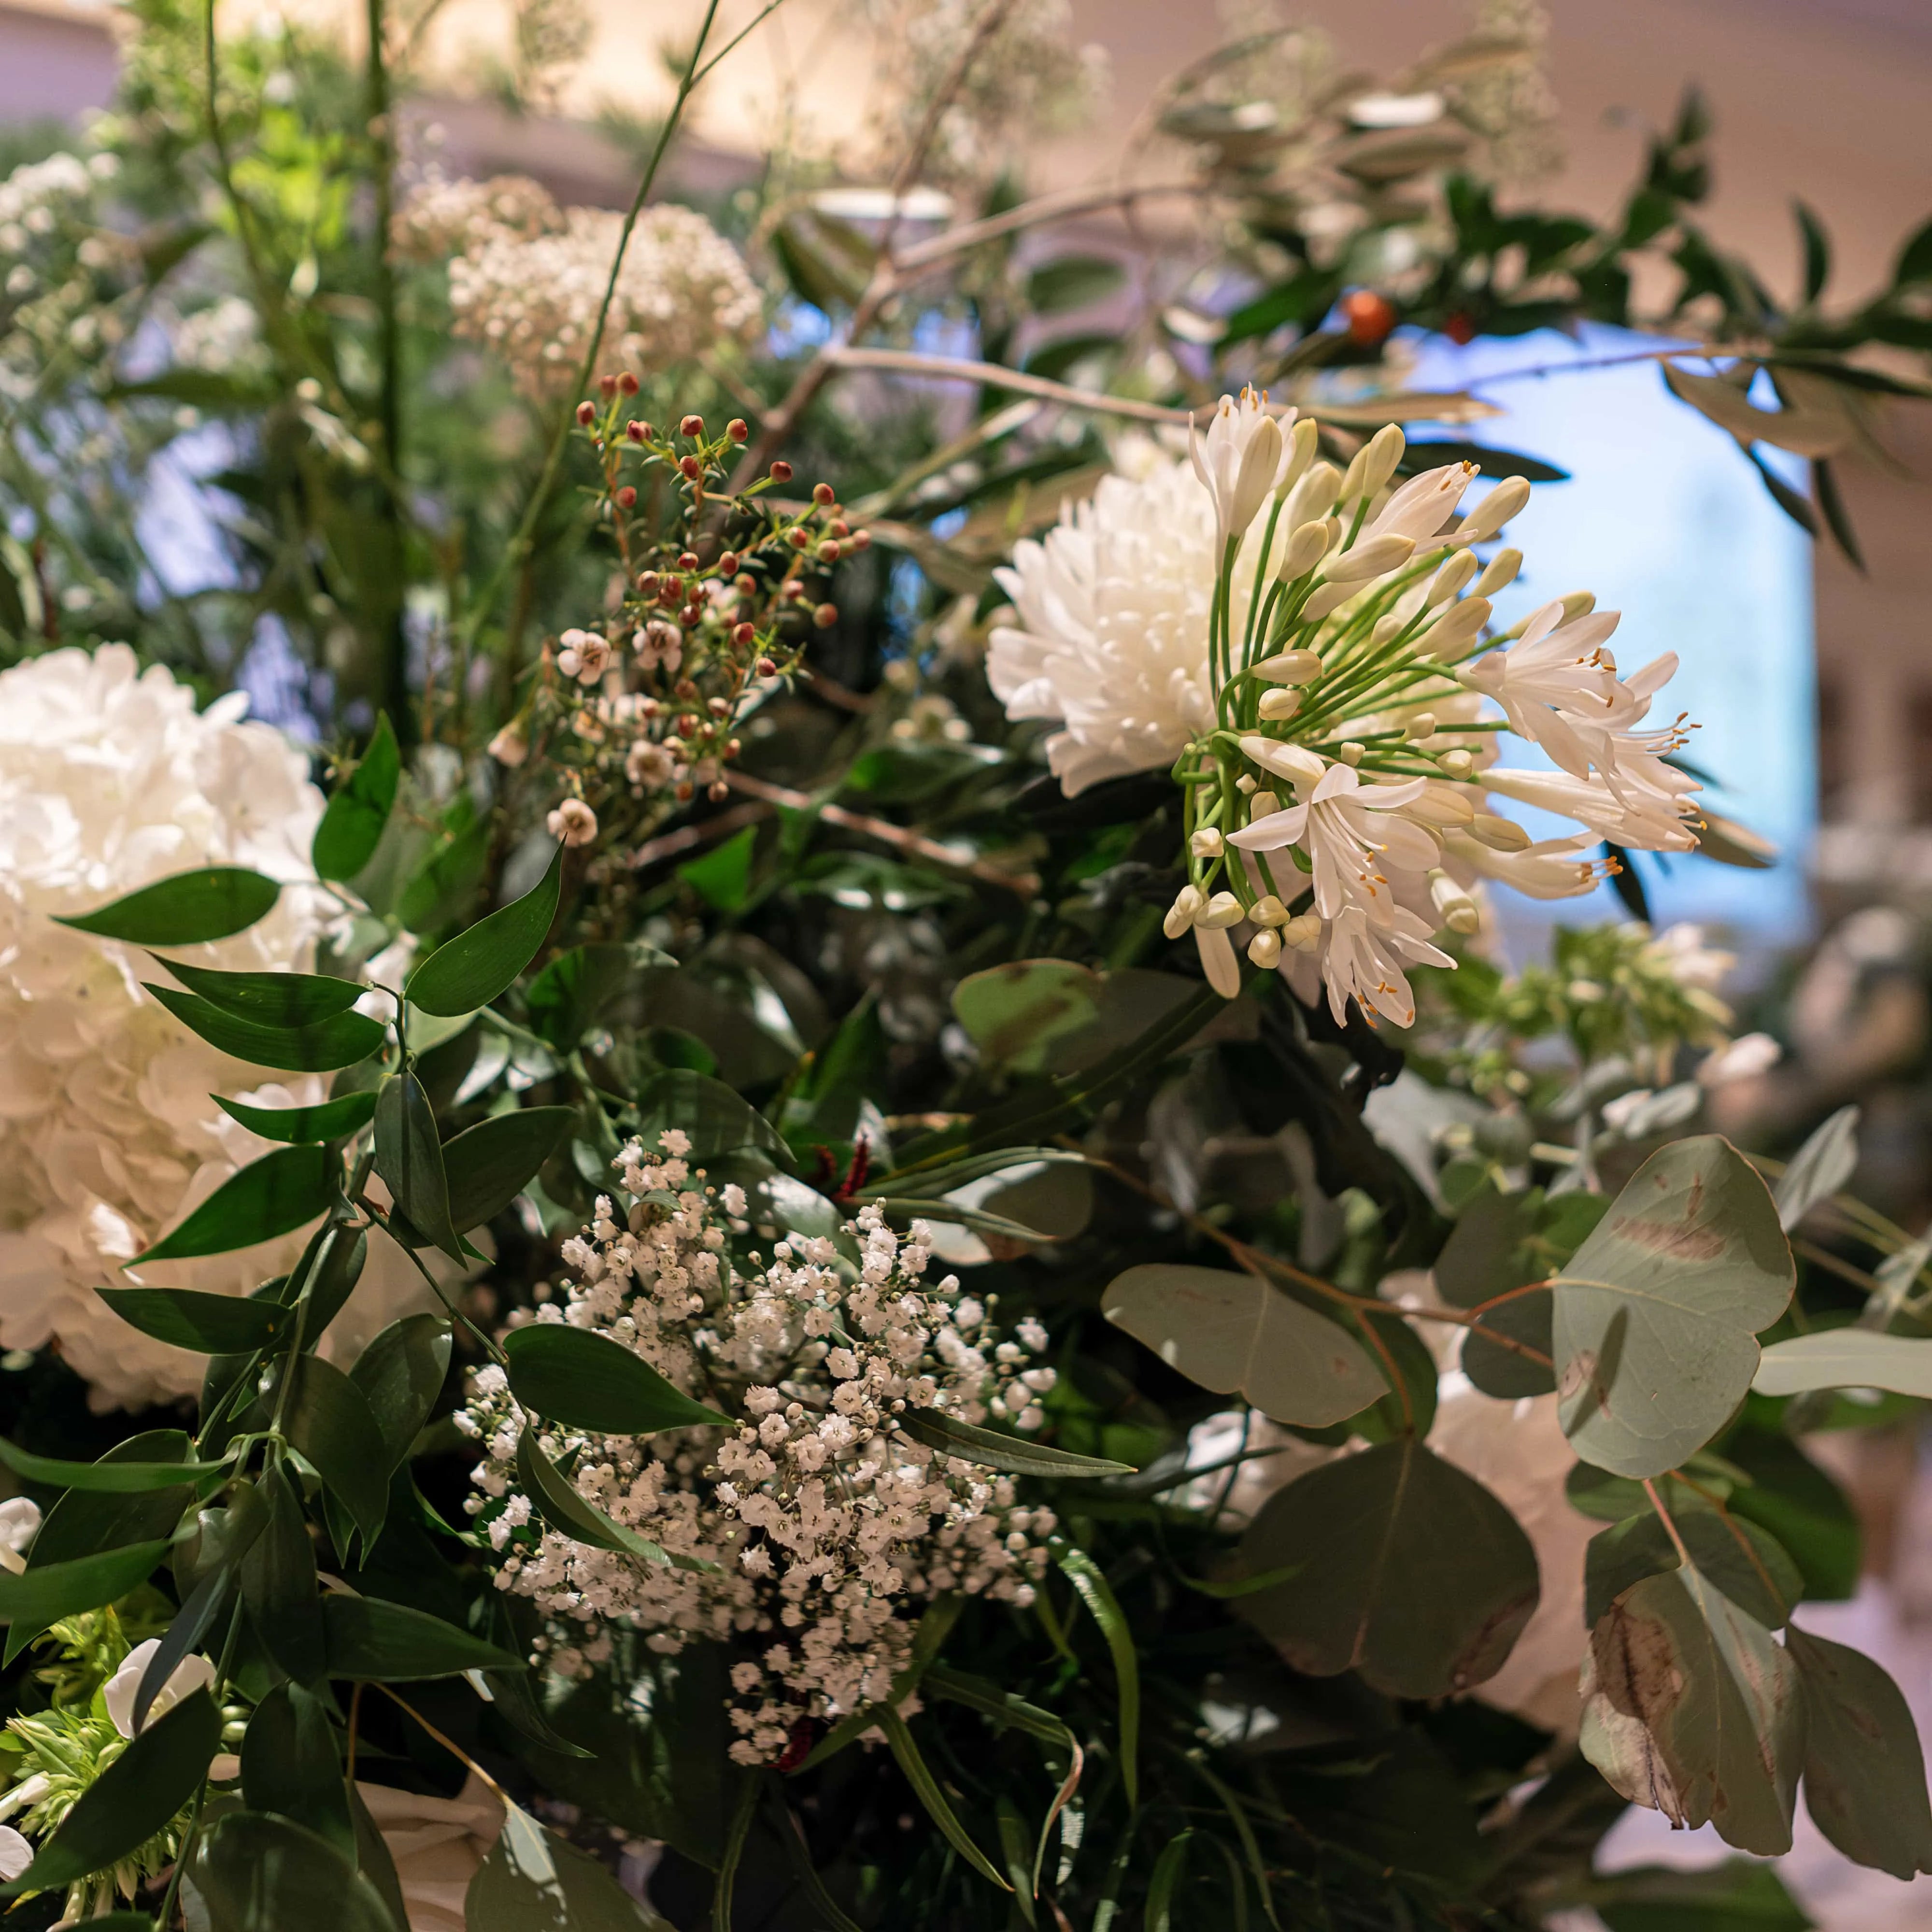  This is a close-up of one of our bespoke floral arrangements for his event. It is a luxurious mix of white blooms and lush greenery, exquisitely crafted for this corporate event. Amaranté London Flowers for Corporate Events - unparalleled attention to detail and elegance.